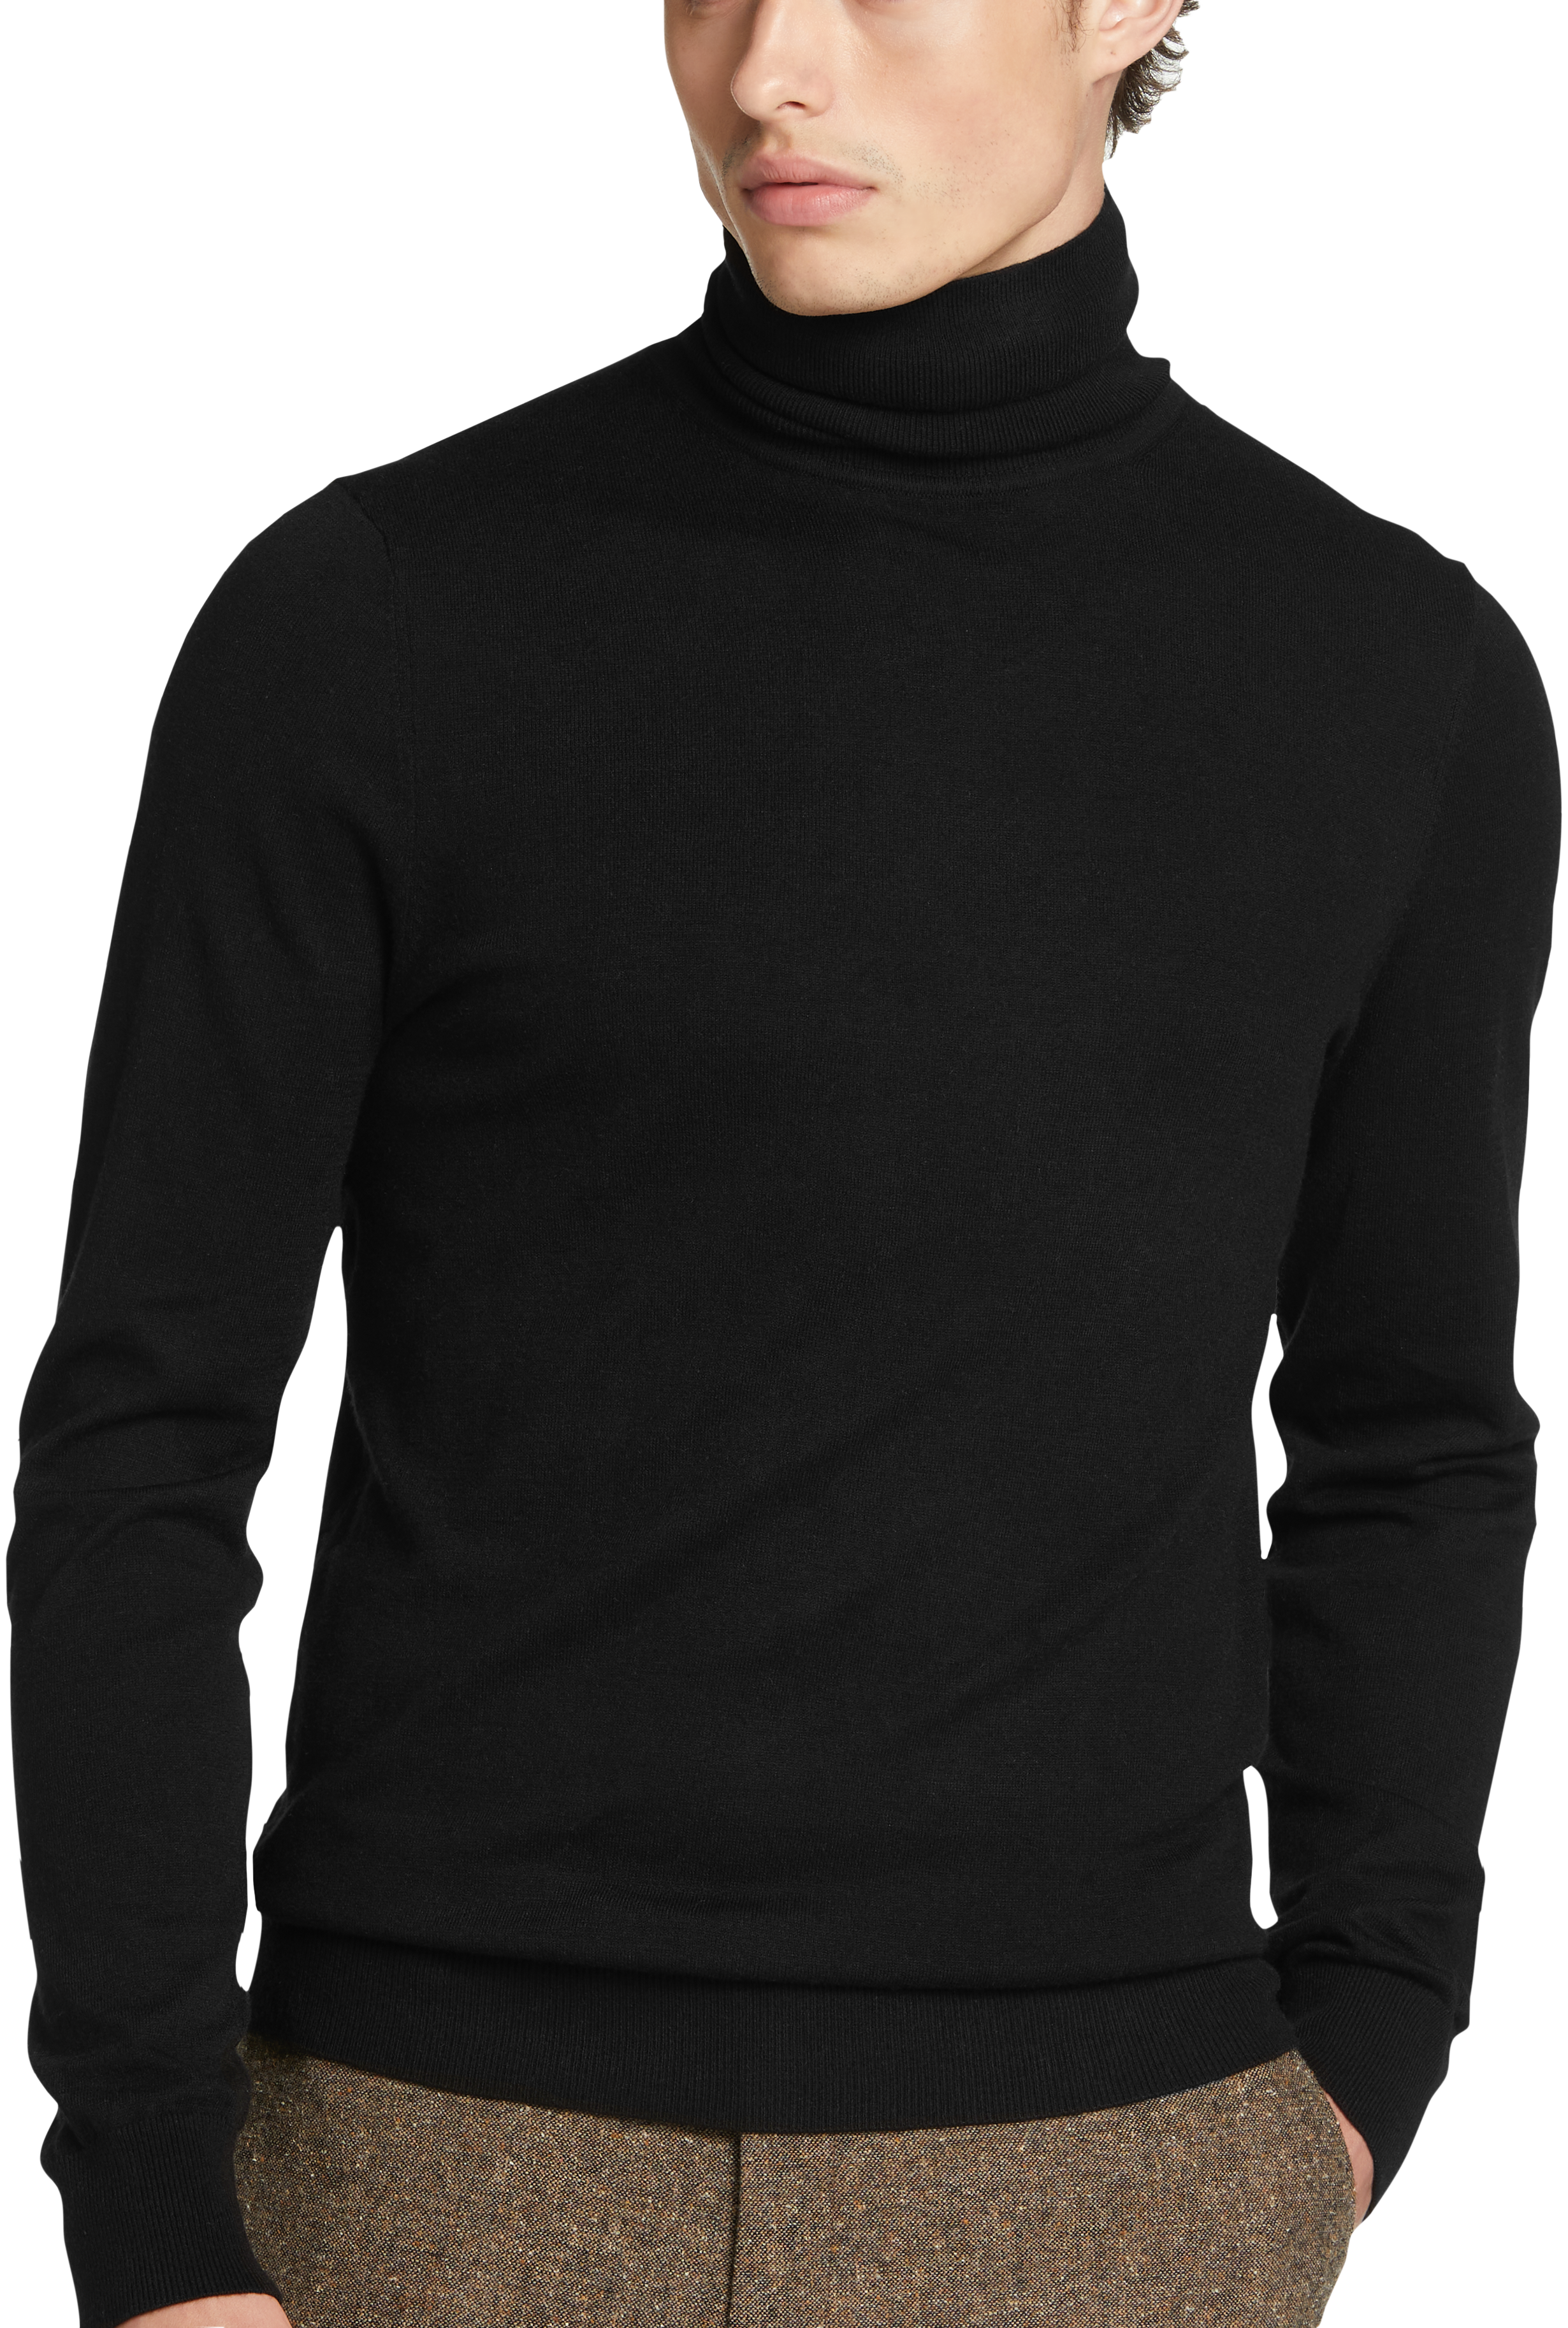 Men Slim Fit Turtleneck Sweater Casual Knitted Pullover Autumn Winter  Sweaters